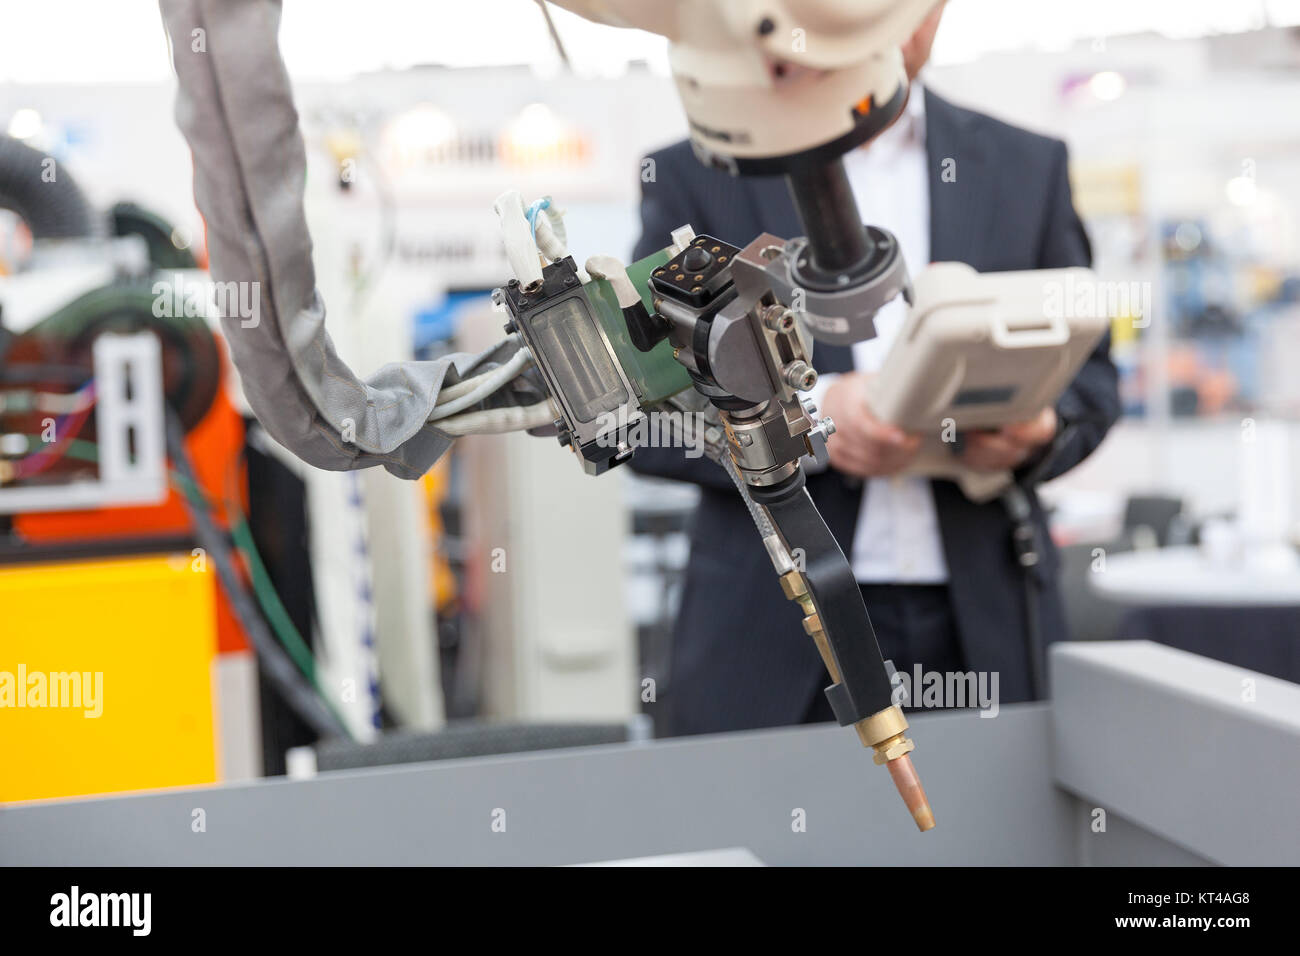 Industrial welding robotic arm, blurred operator in the background Stock Photo